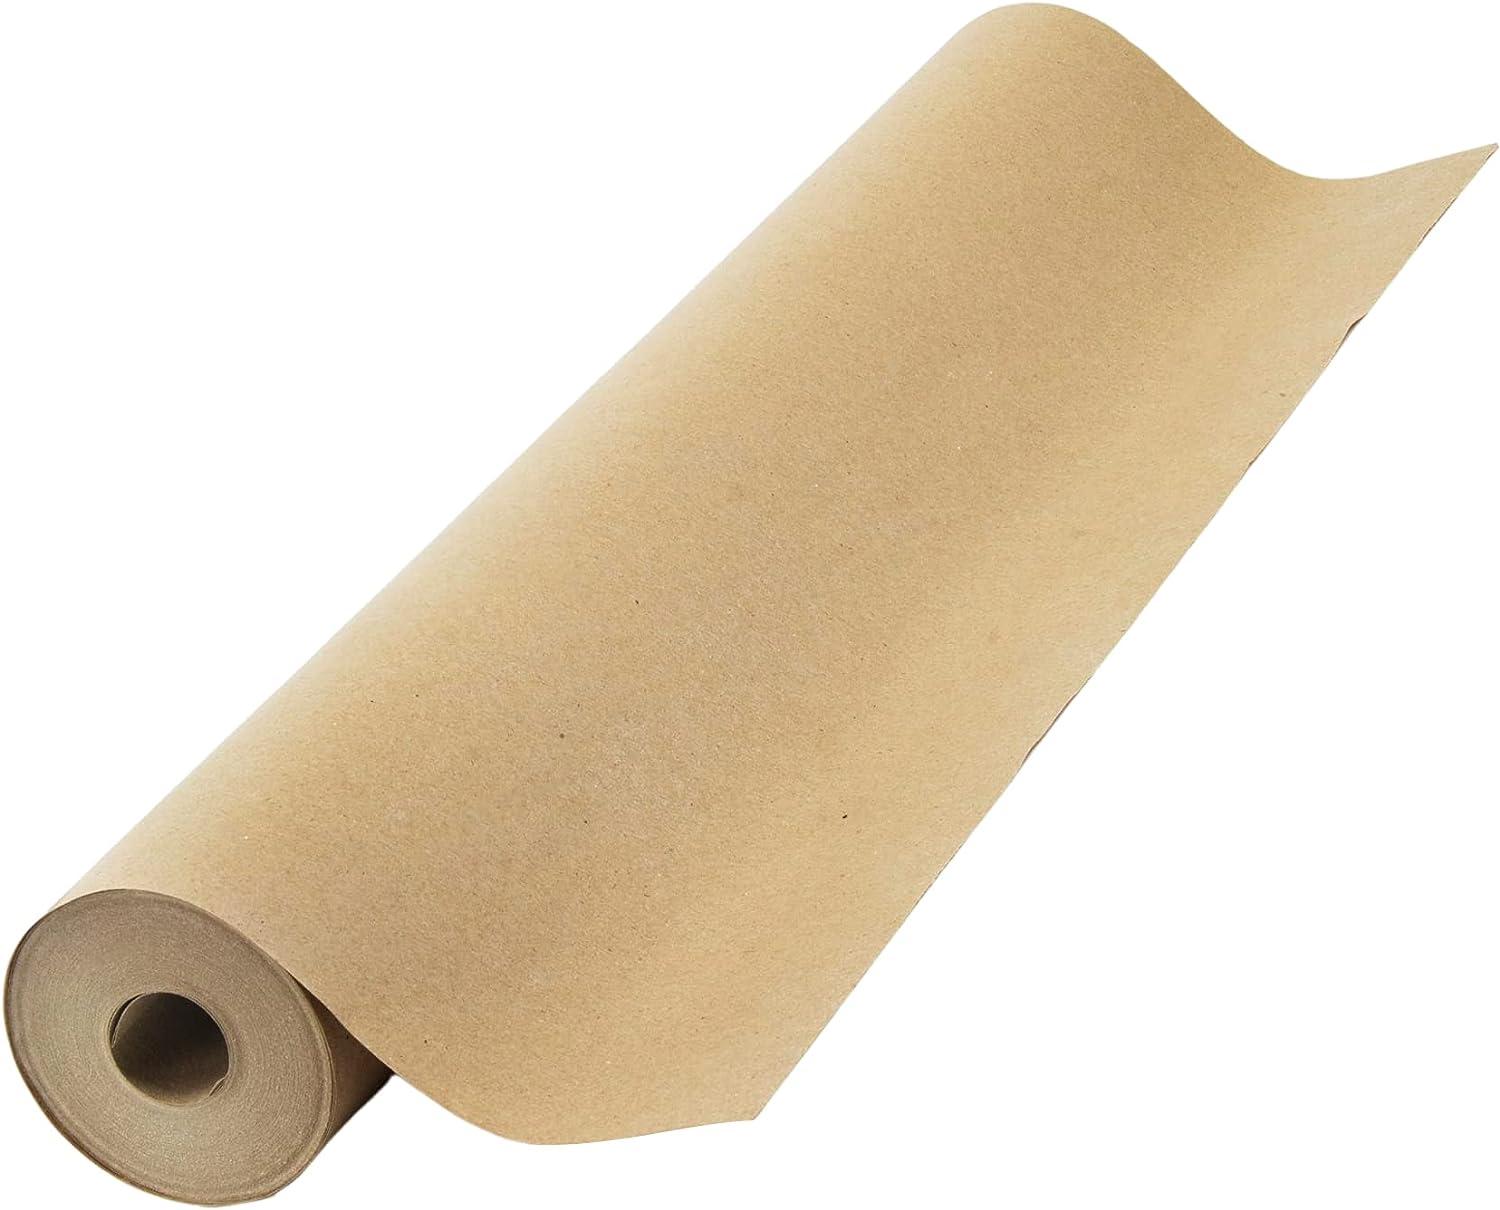 Where can I get brown packing paper mesh? - Arts & Crafts Stack Exchange